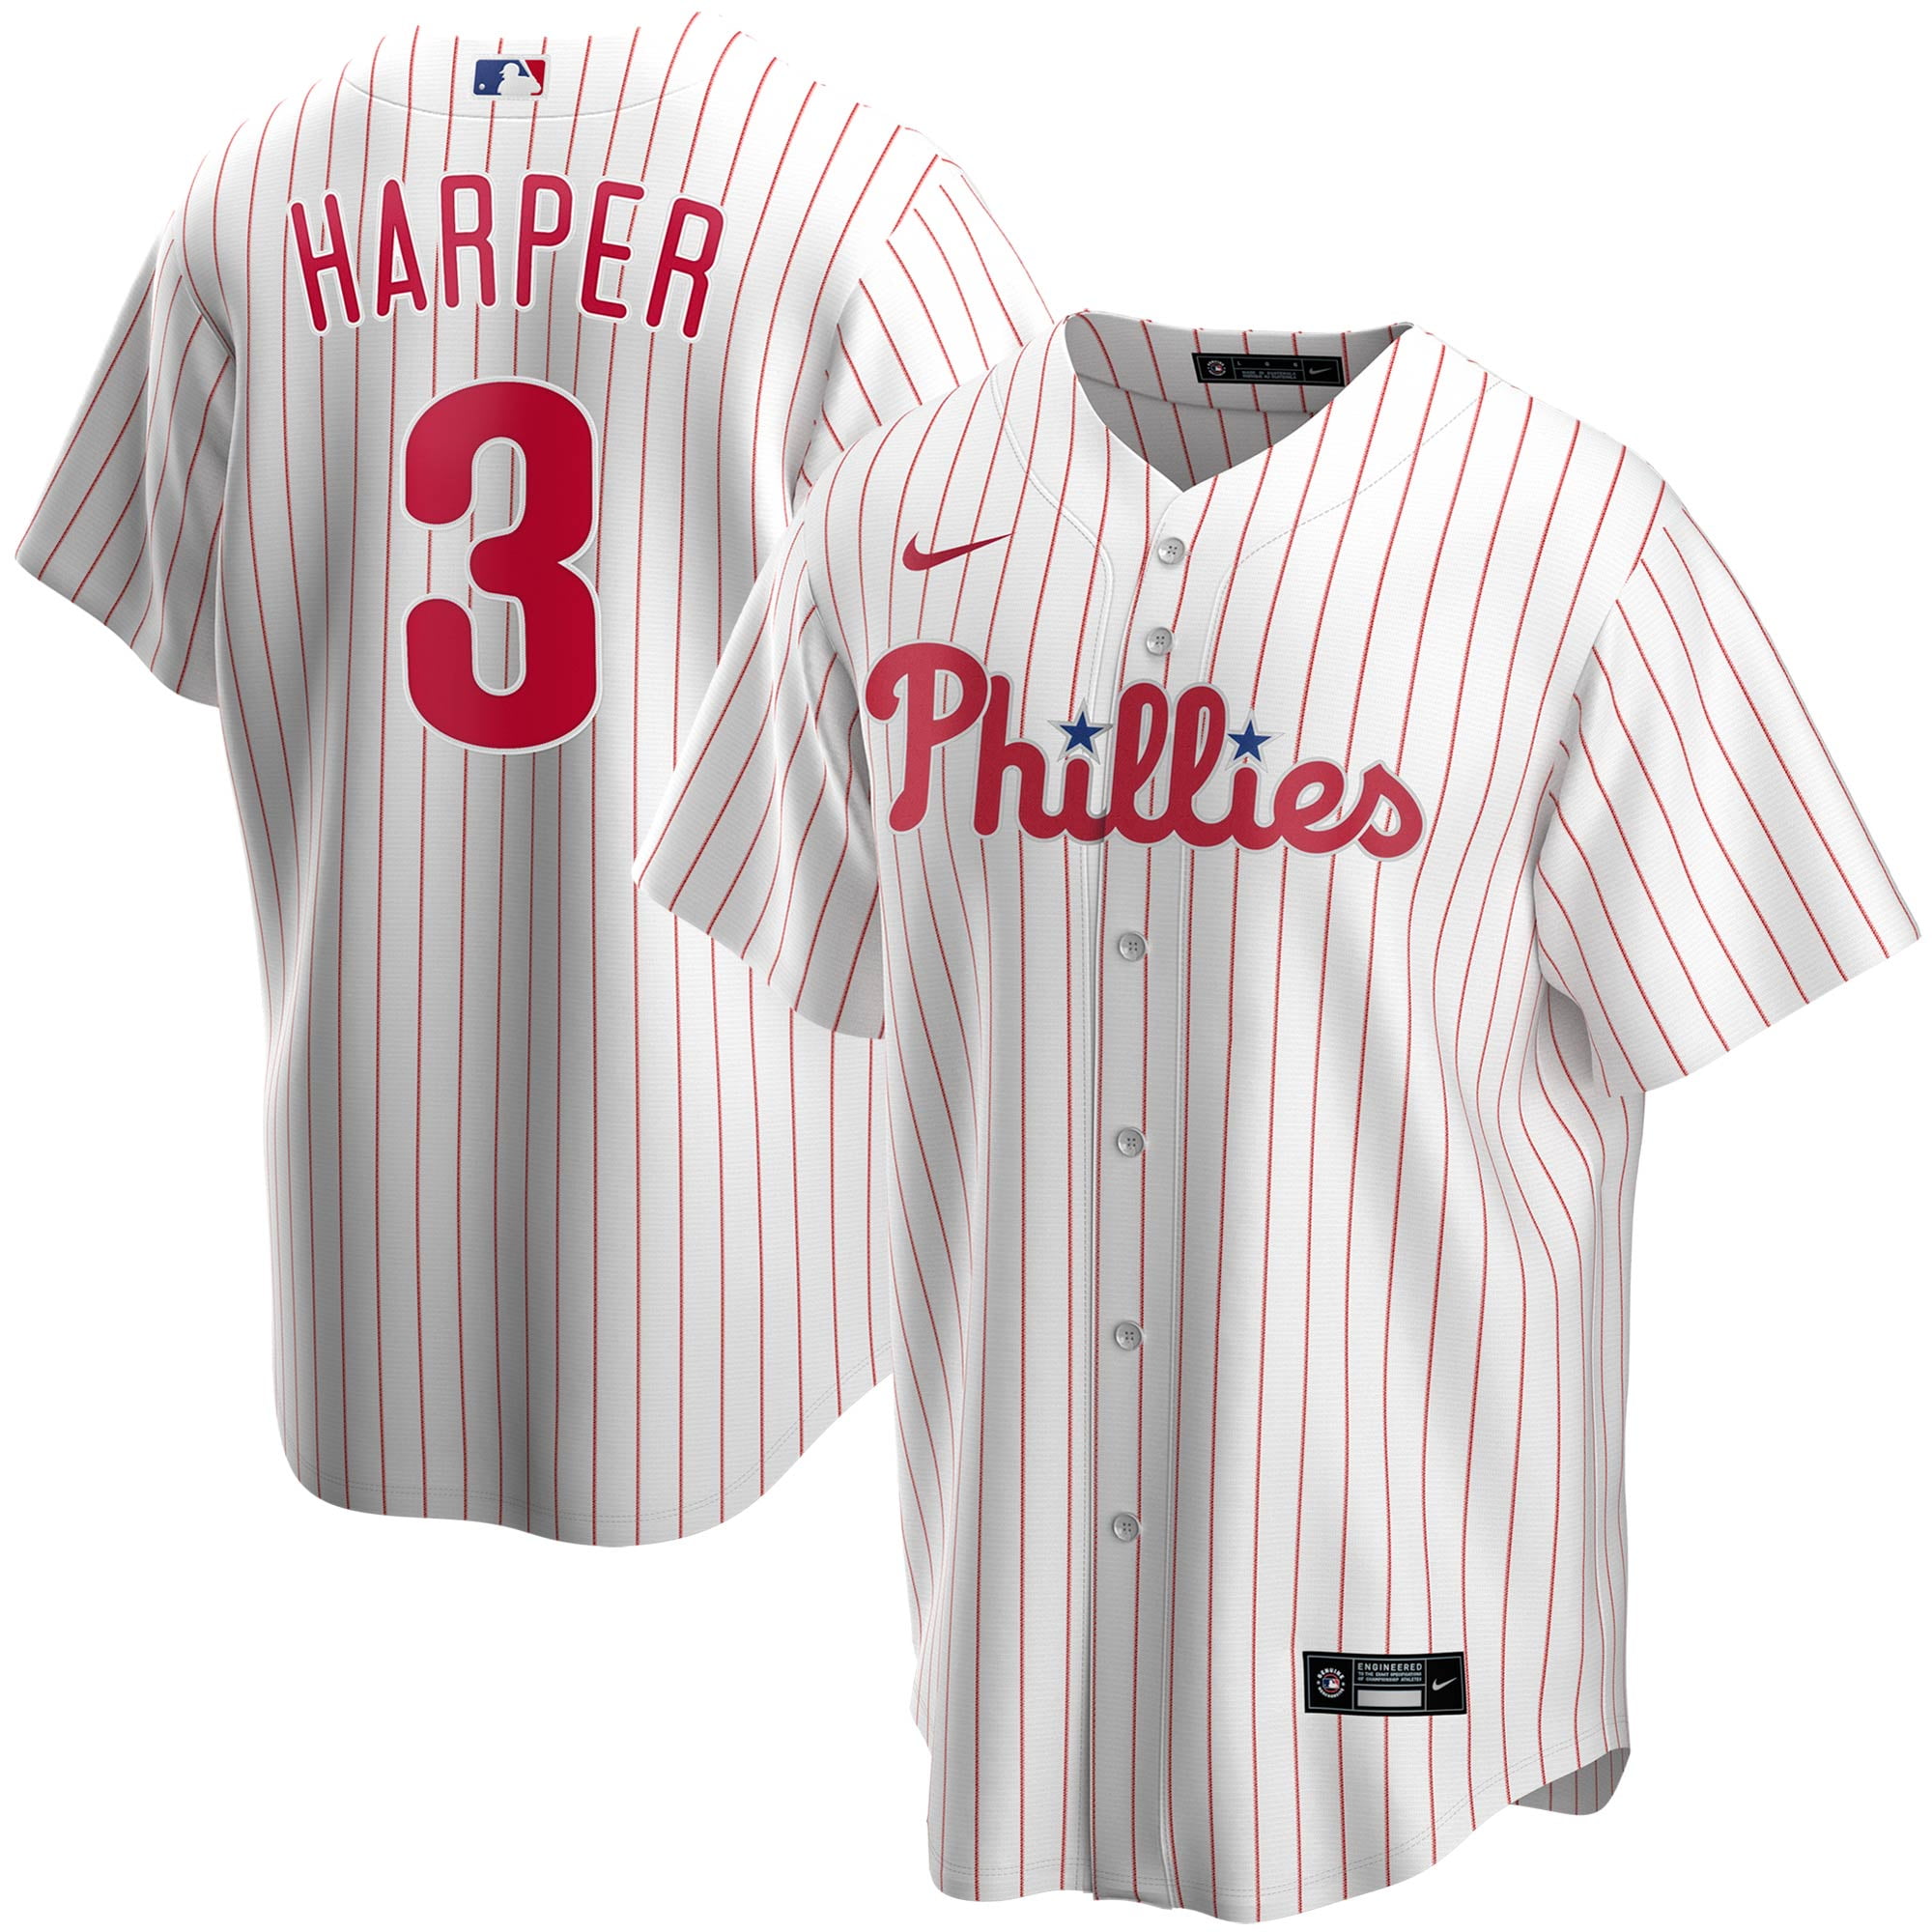 youth harper jersey